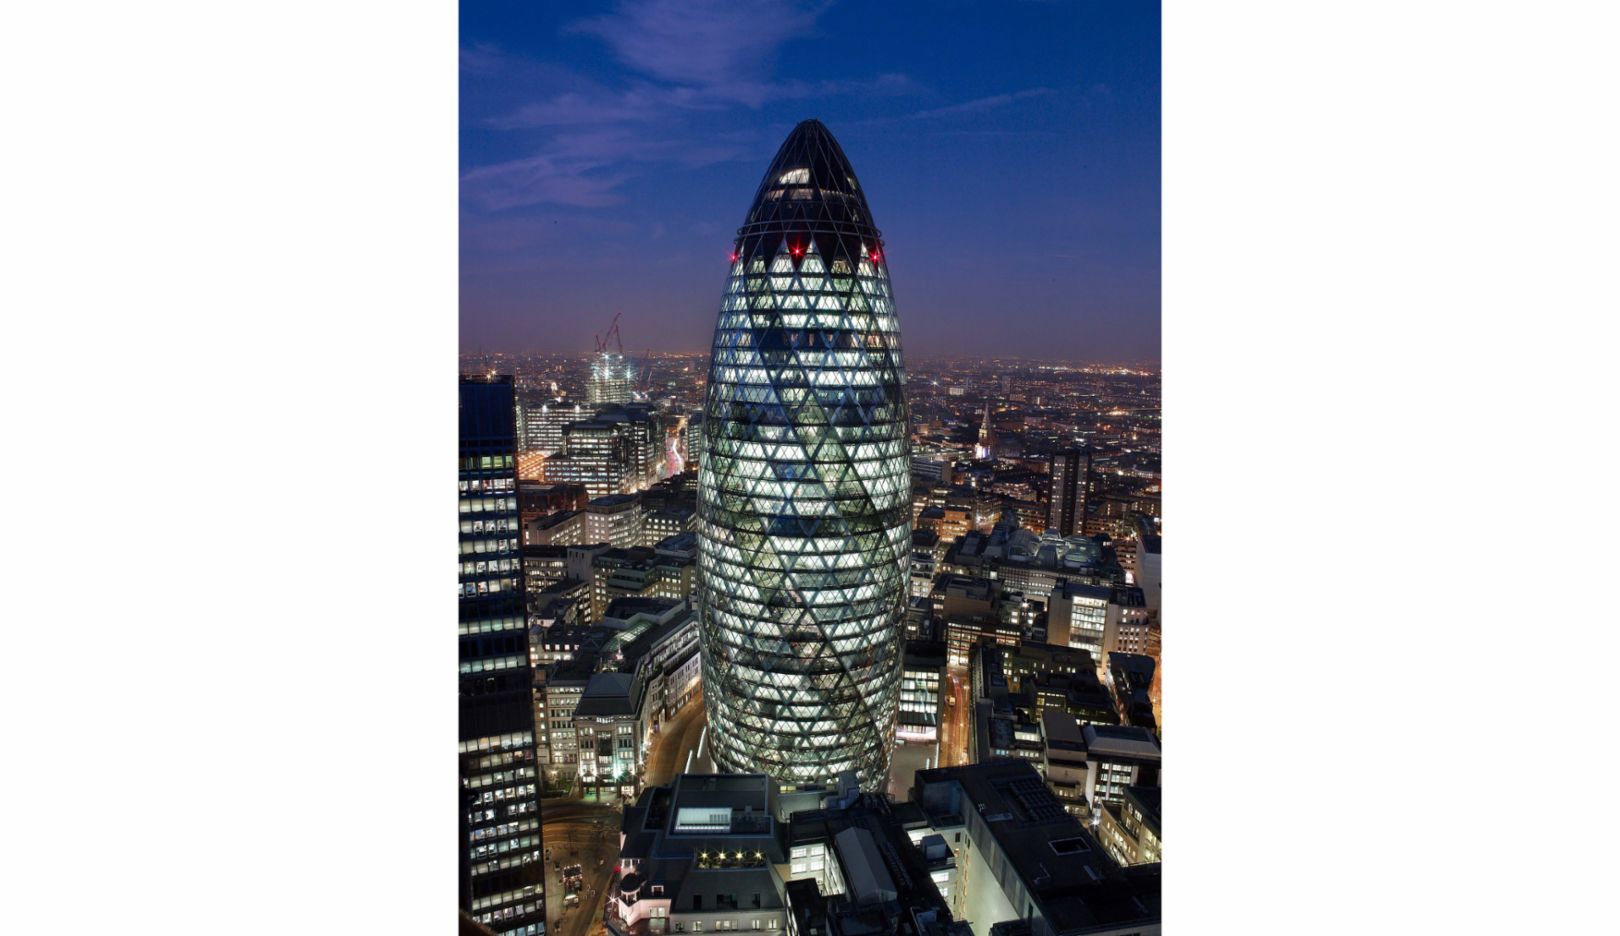 Londoners simply call it The Gherkin with reference to its cucumber-like shape. The remarkable forty-one-story building at 30 St Mary Axe is the city's first ecological skyscraper. Photo: Nigel Young / Foster + Partners